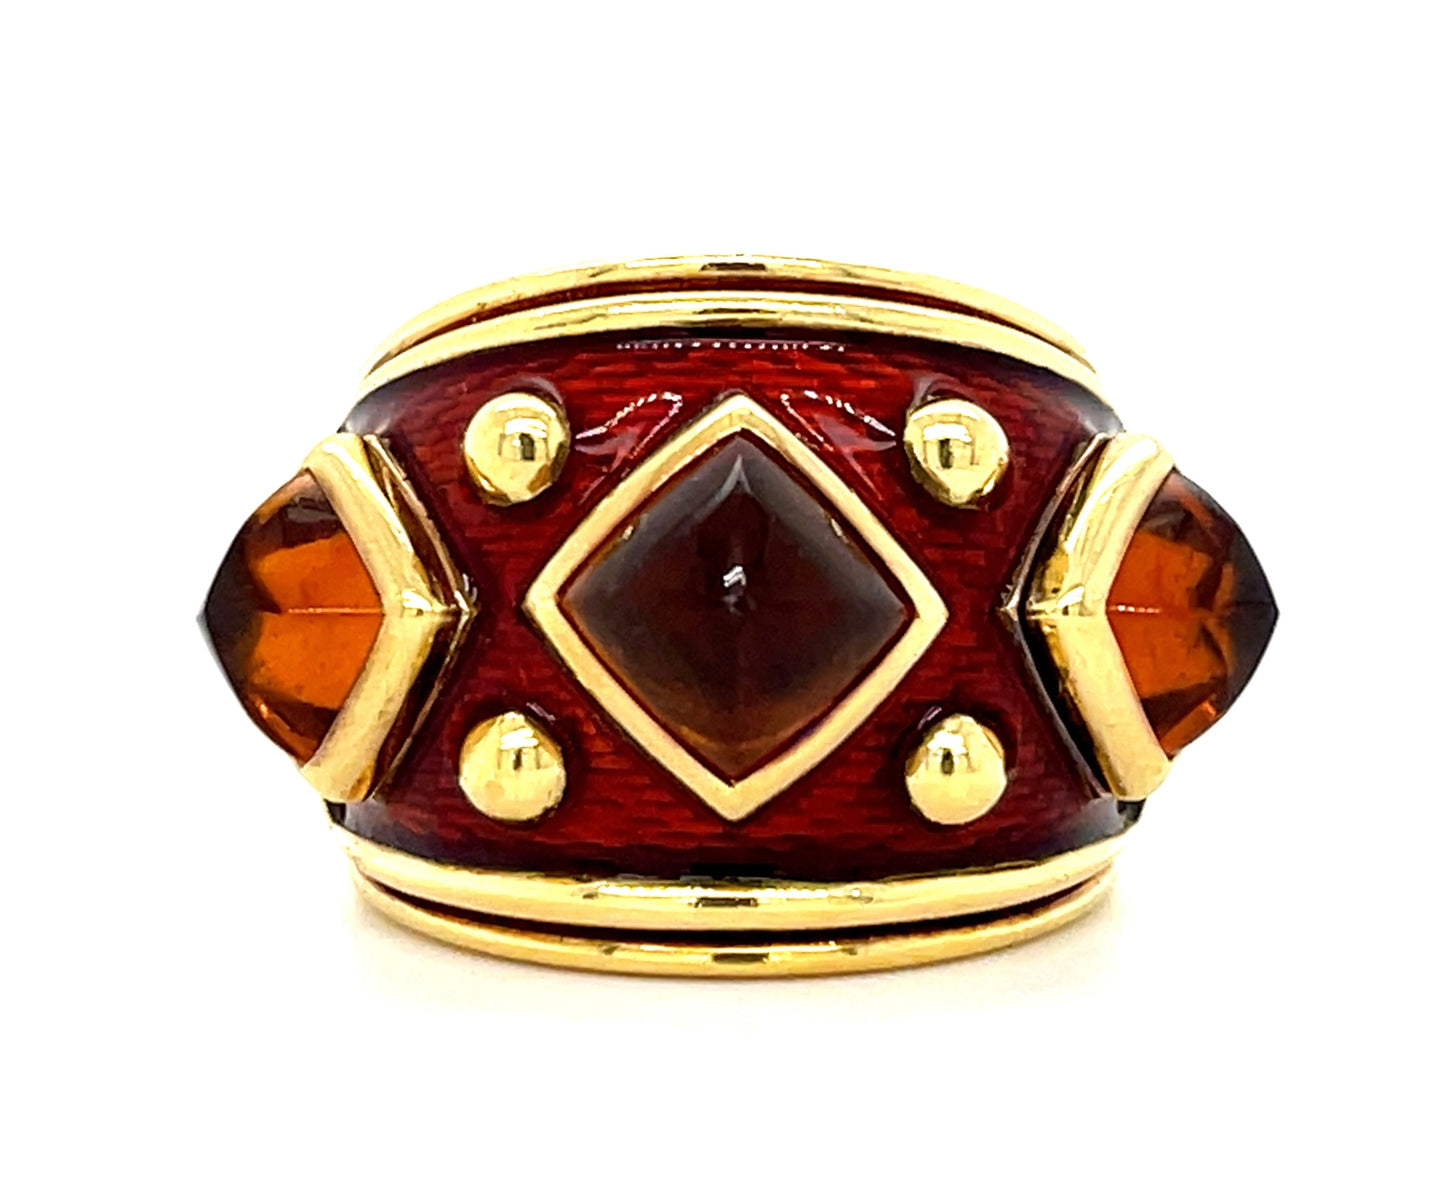 Cabochon Citrine and Enamel 18KY Estate Ring Signed "Amir Shaker" "(ch)"